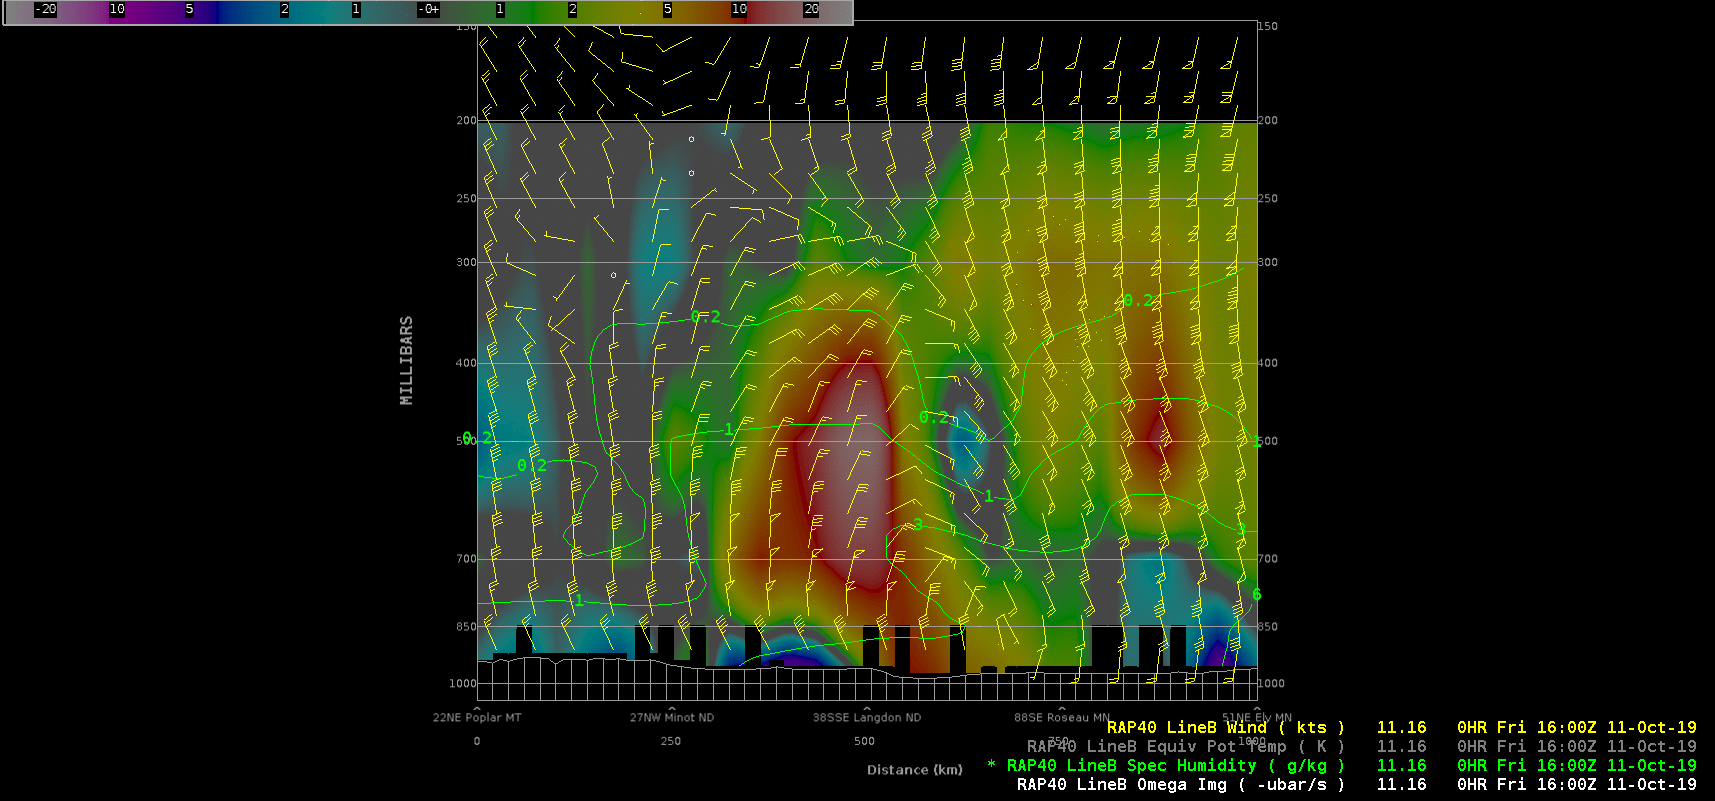 Cross section of RAP40 model fields along Line B-B' at 16 UTC [click to enlarge]